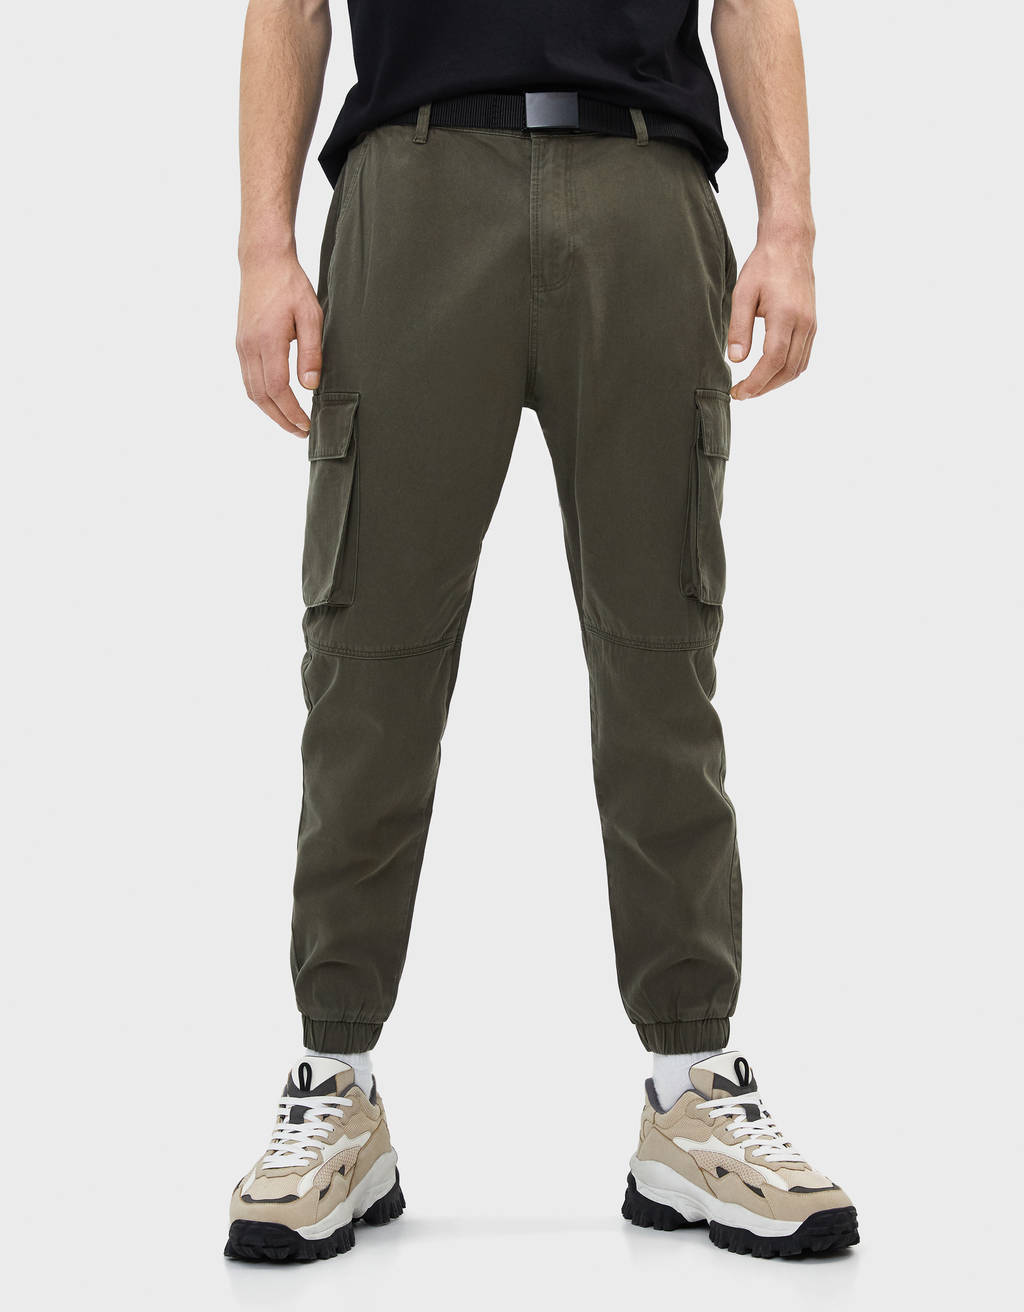 Buy Instafab Plus Mens Sage Green Cargo Trousers for Casual Wear  6  Pockets  PlusSize Fit  Button Closure  Cotton Poly Cargo Pant Crafted  with Comfort Fit for Everyday Wear at Amazonin